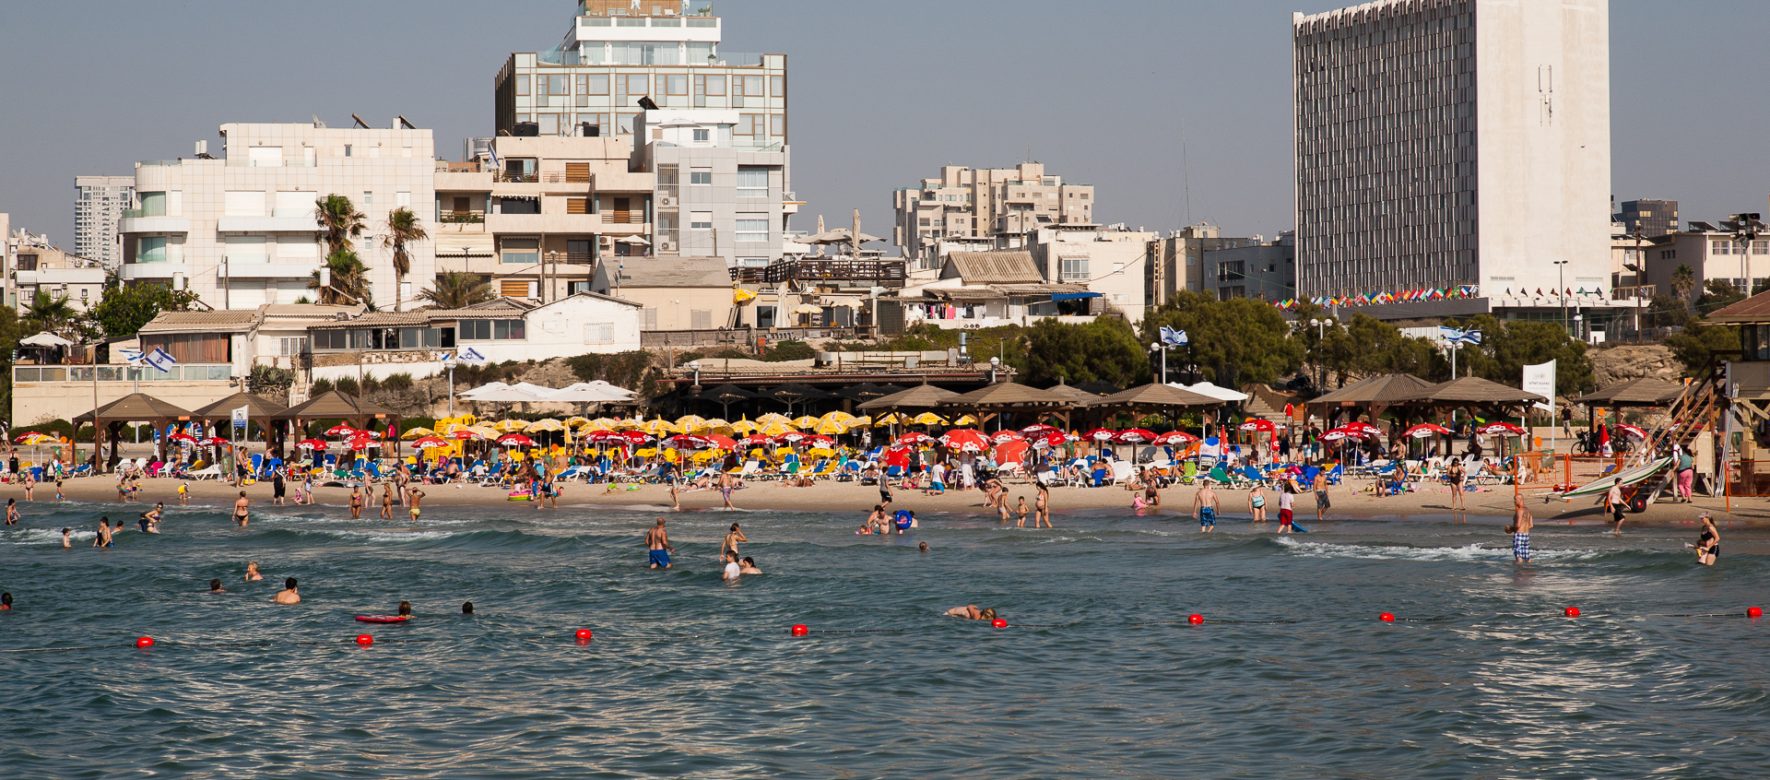 Israeli tourism shows record levels 1